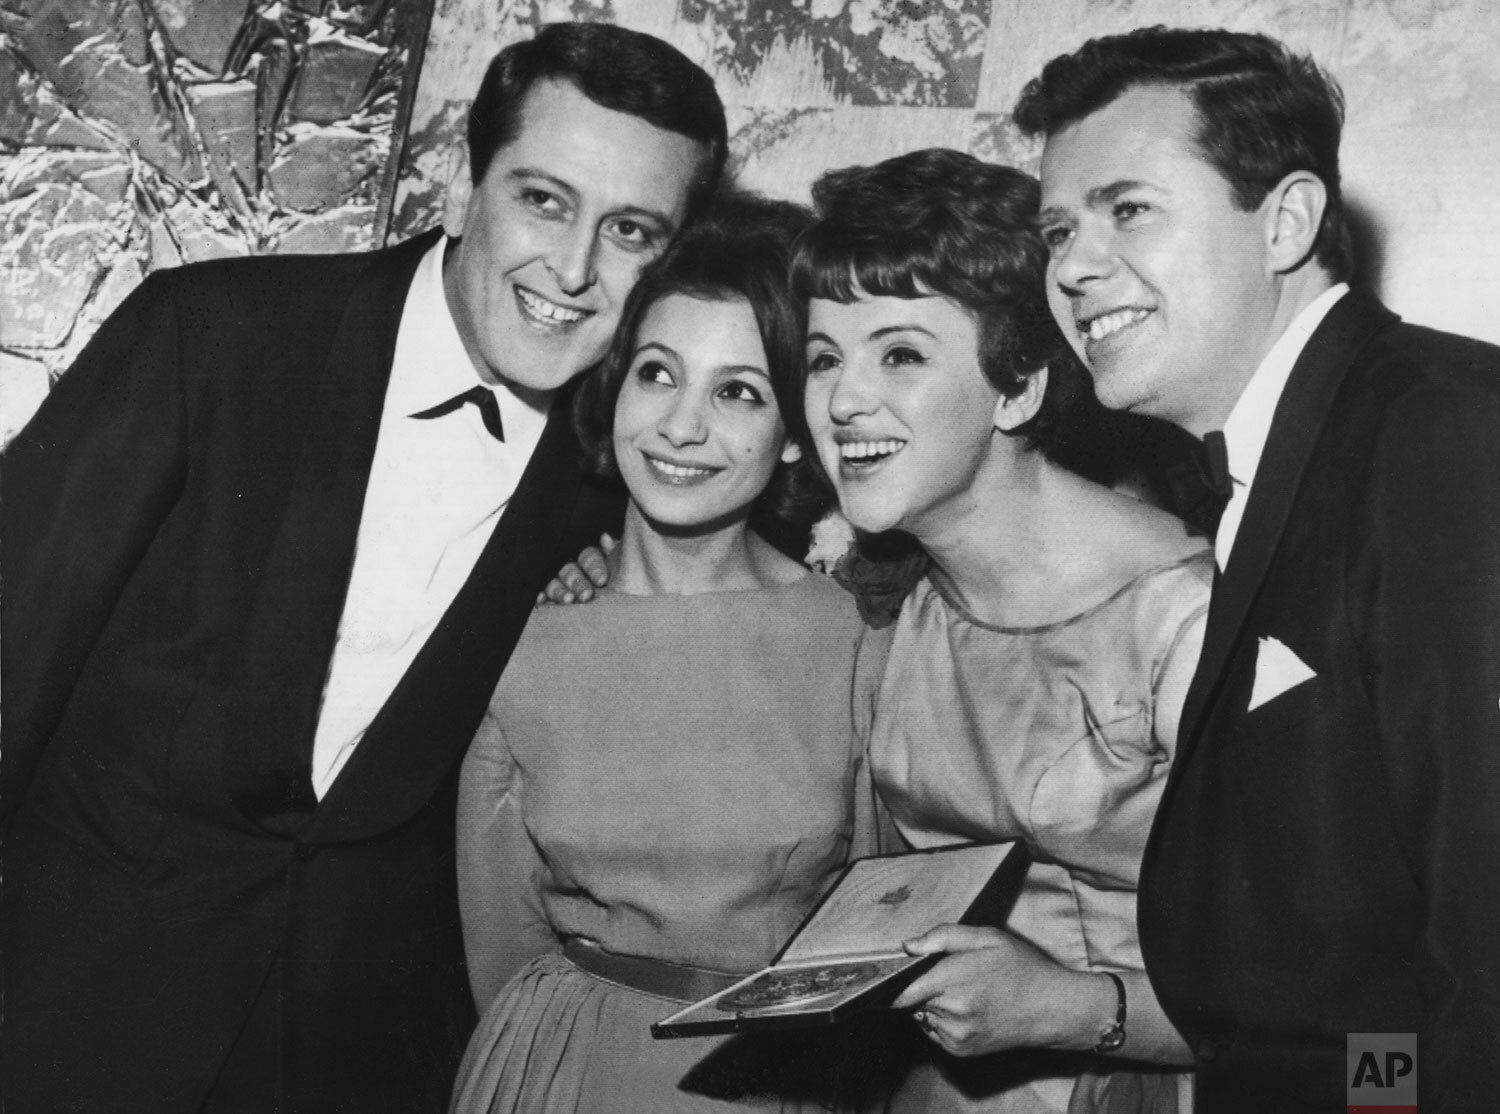  The winners of the Eurovision Song Contest pose after the awarding ceremony at the BBC Television Centre in London, United Kingdom, Saturday March 23, 1963. Winners were Grethe und Jorgen Ingman from Denmark, right, second came Esther Ofarim from Sw